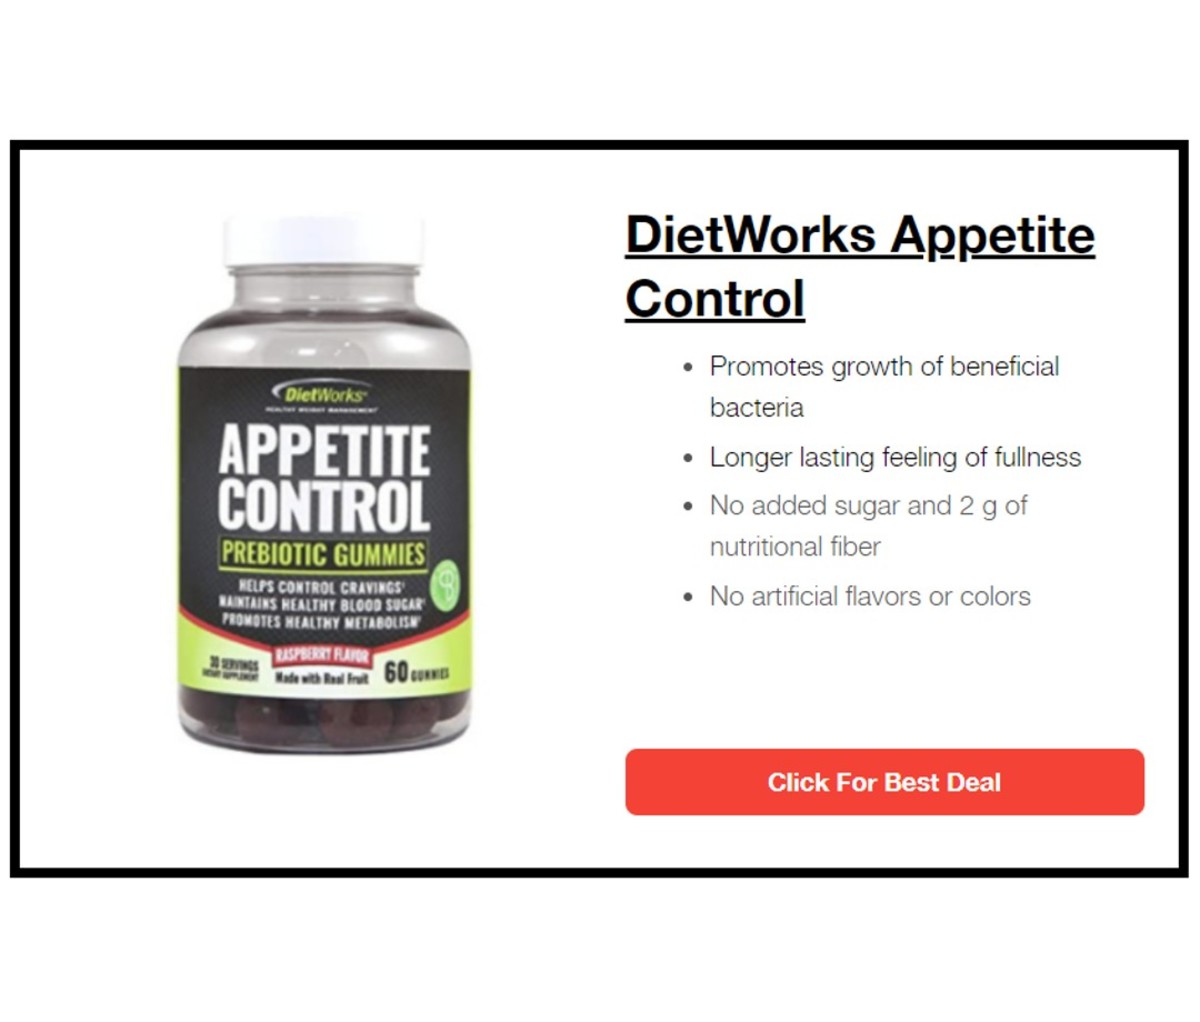 DietWorks Appetite Control